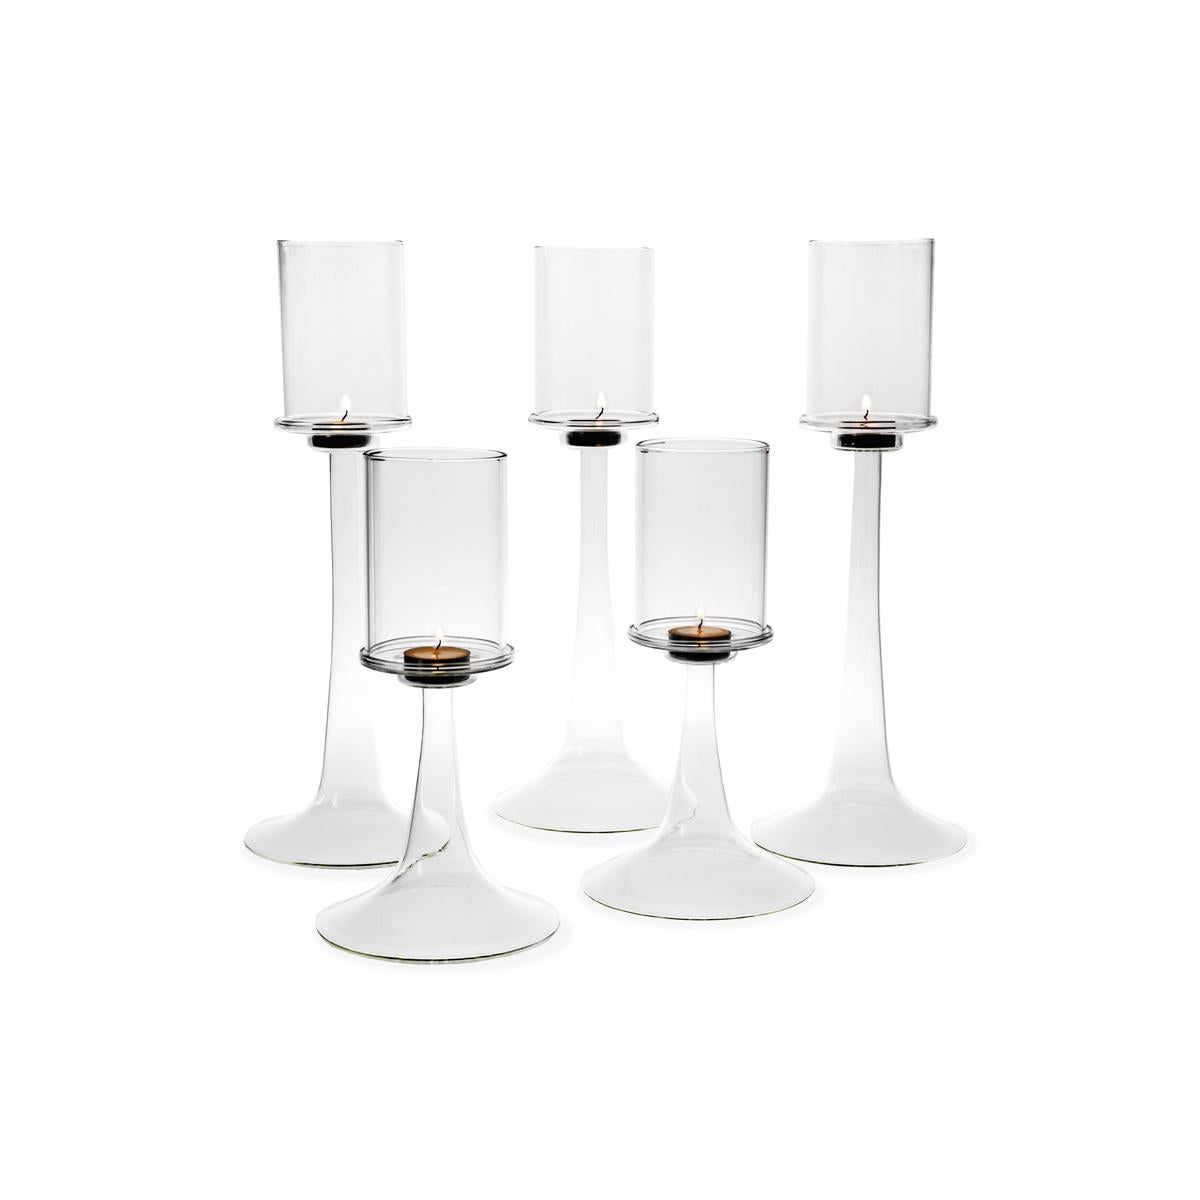 Fiamma is an elegant candle holder in blown glass consisting of two elements: a tapered and slim base on which a cylindrical lampshade lays. Fiamma, designed by Aldo Cibic, is available also in a lower size.